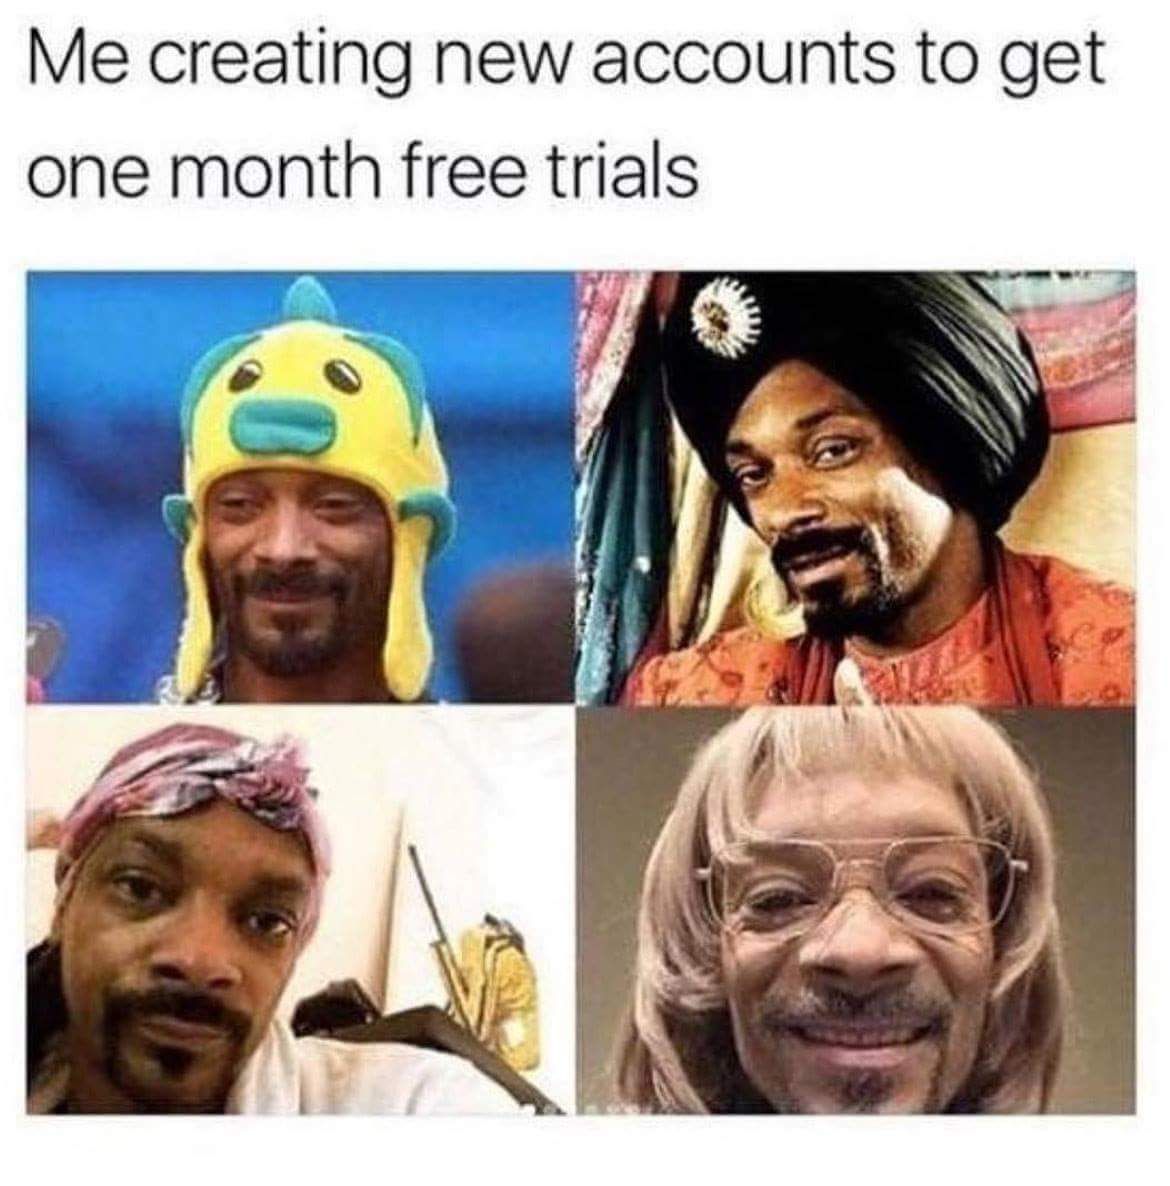 Me trying to get some of those free trials